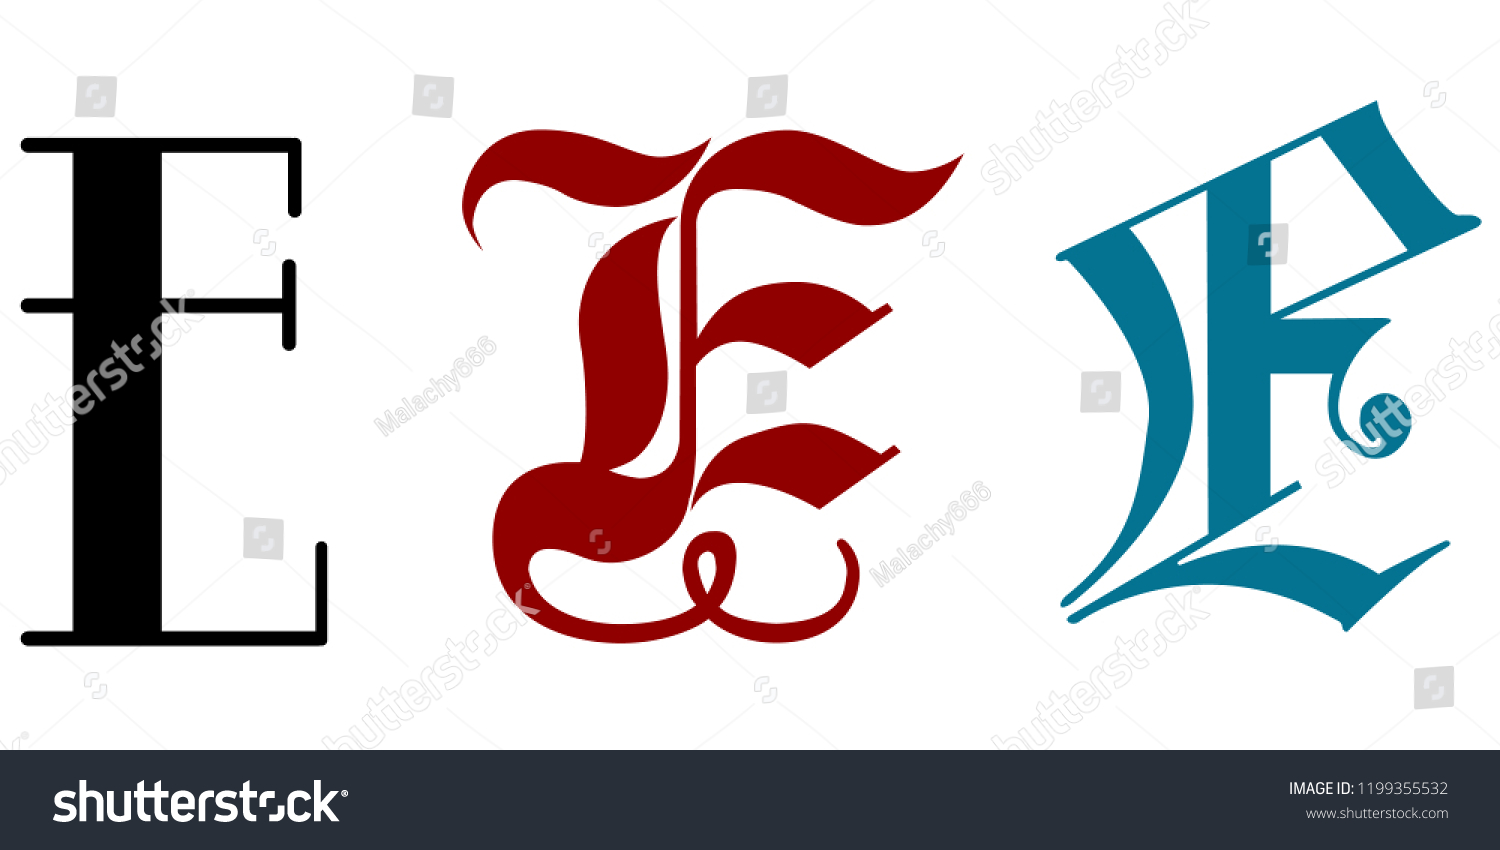 Letter E Three Different Calligraphy Styles Stock Vector Royalty